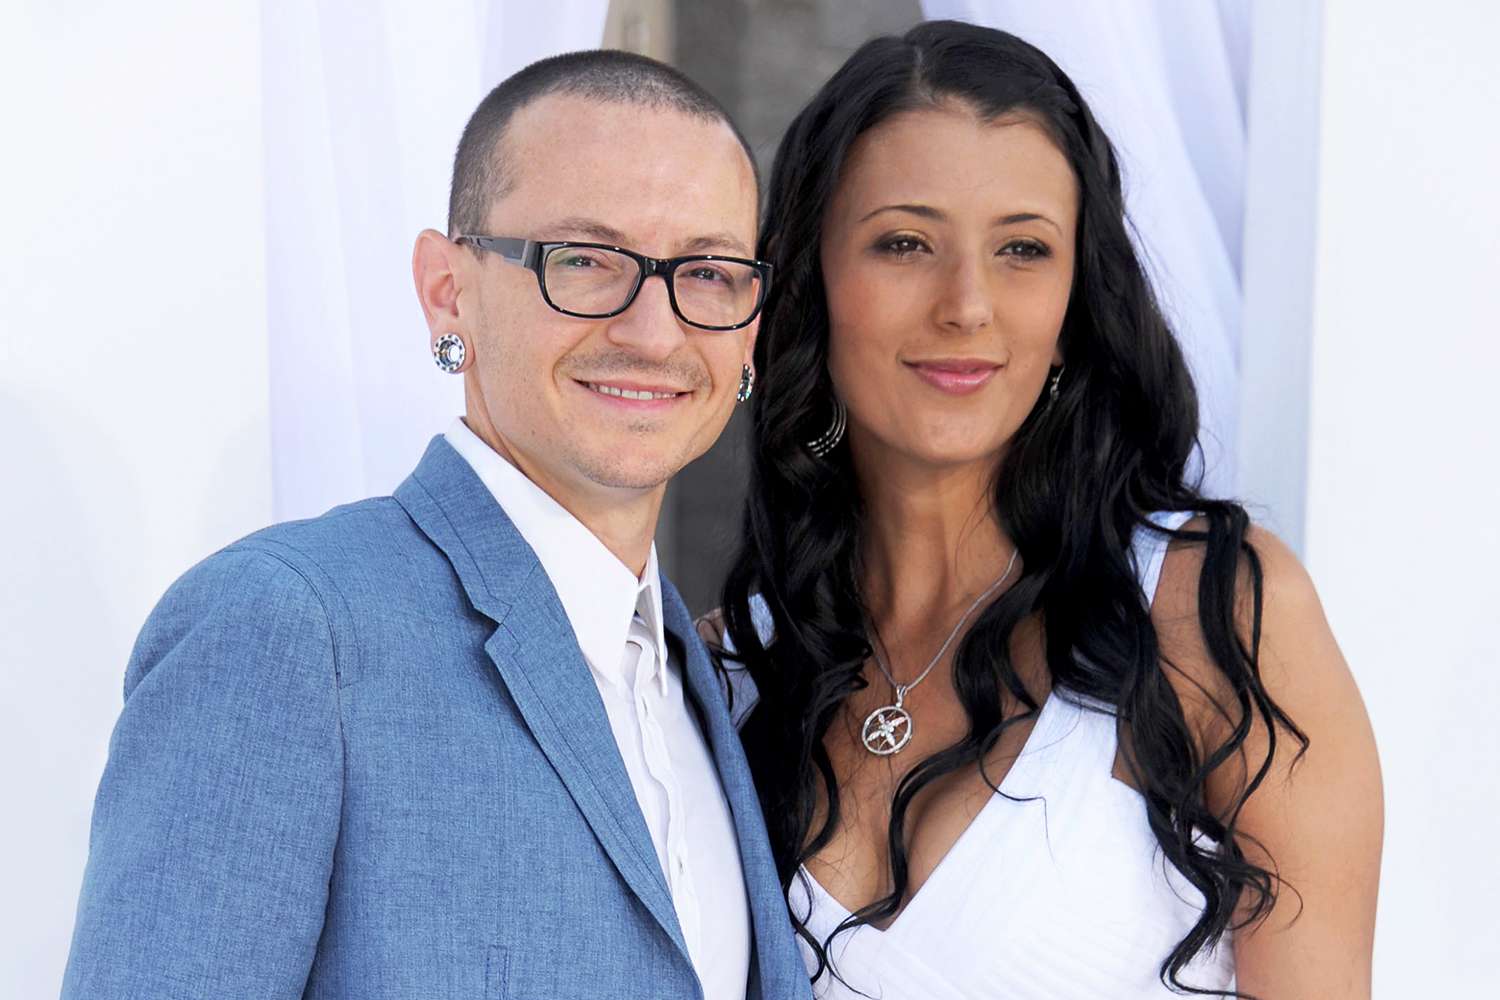 Chester Bennington of Linkin Park and wife Talinda Ann Bentley arrive at the 2012 Billboard Music Awards at MGM Grand on May 20, 2012 在拉斯维加斯, 内华达.